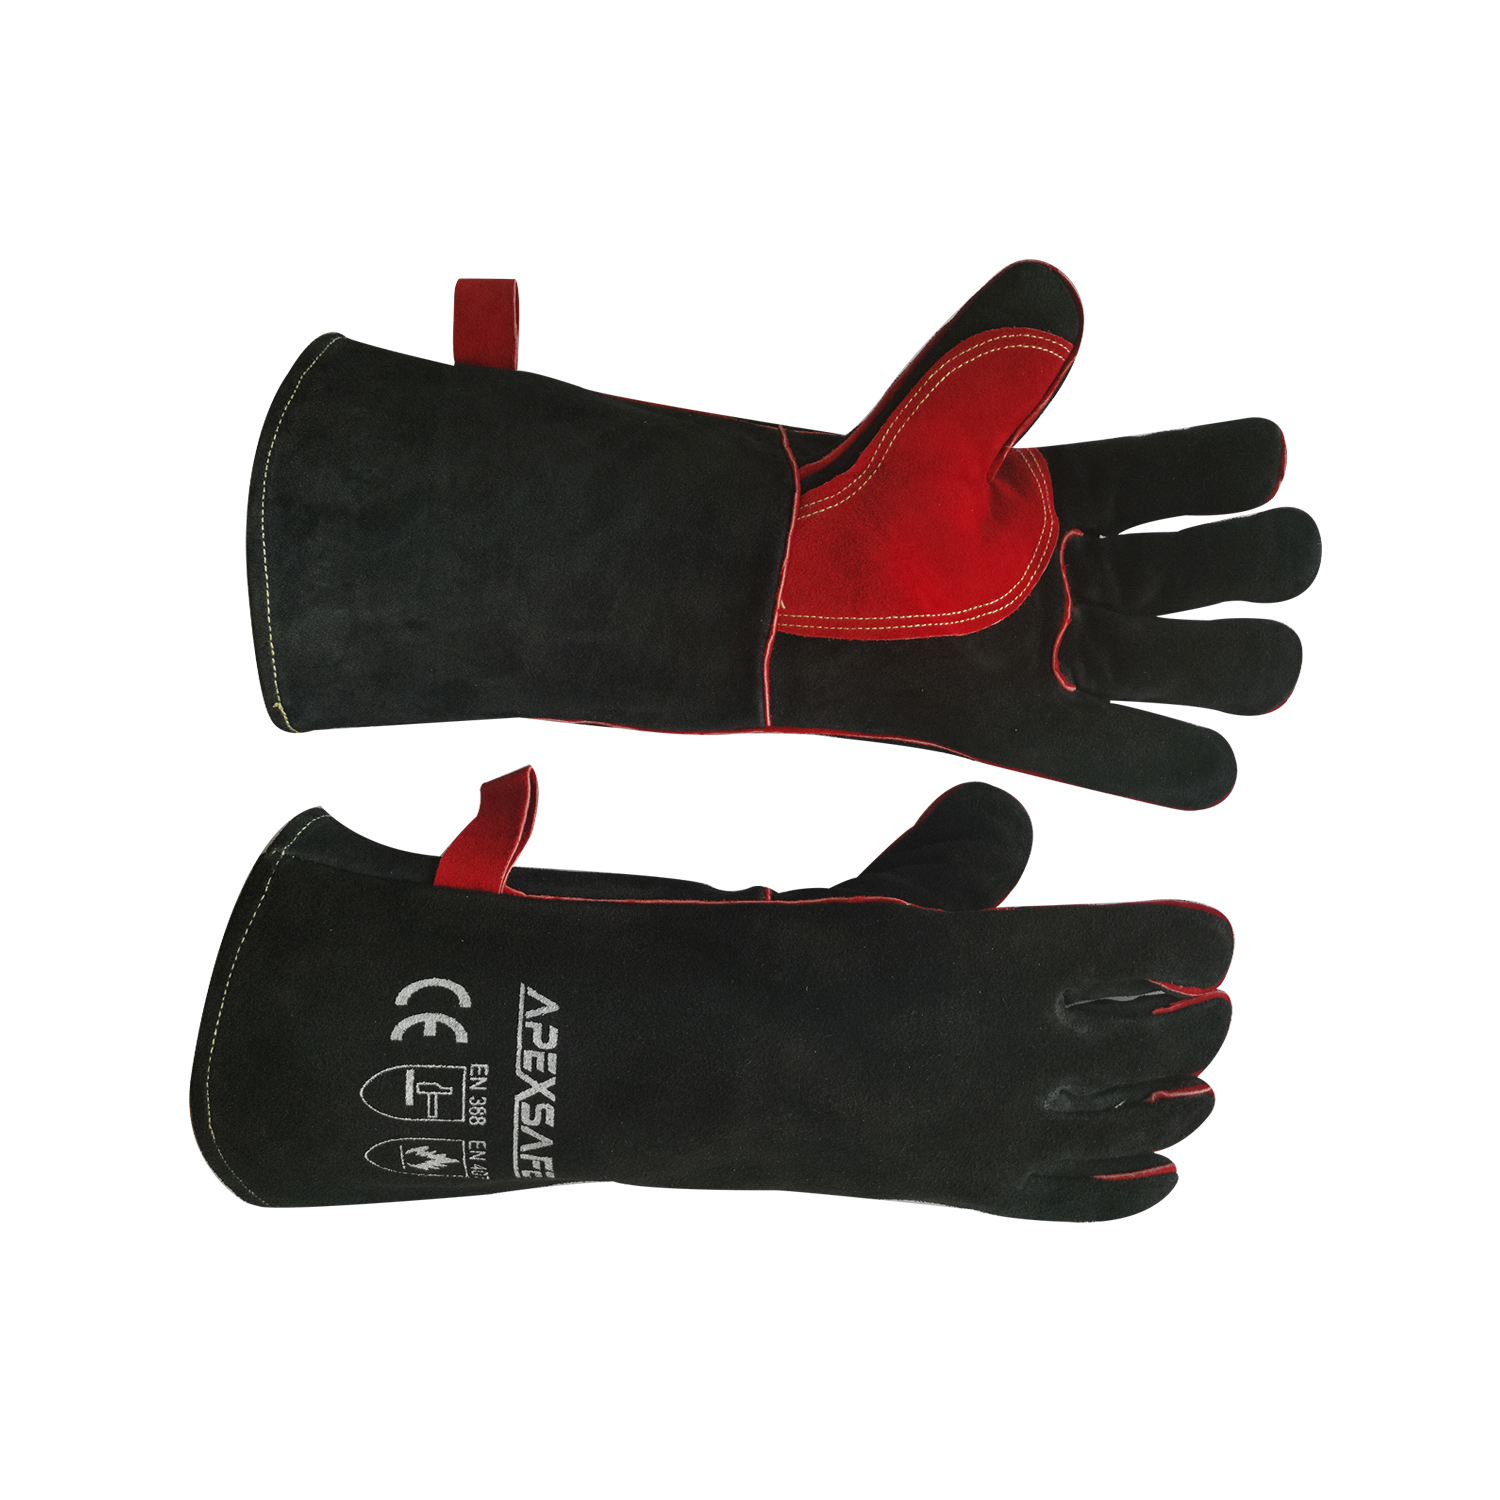 Leather Forge Welding Gloves Heat / Fire Resistant Gloves Featured Image